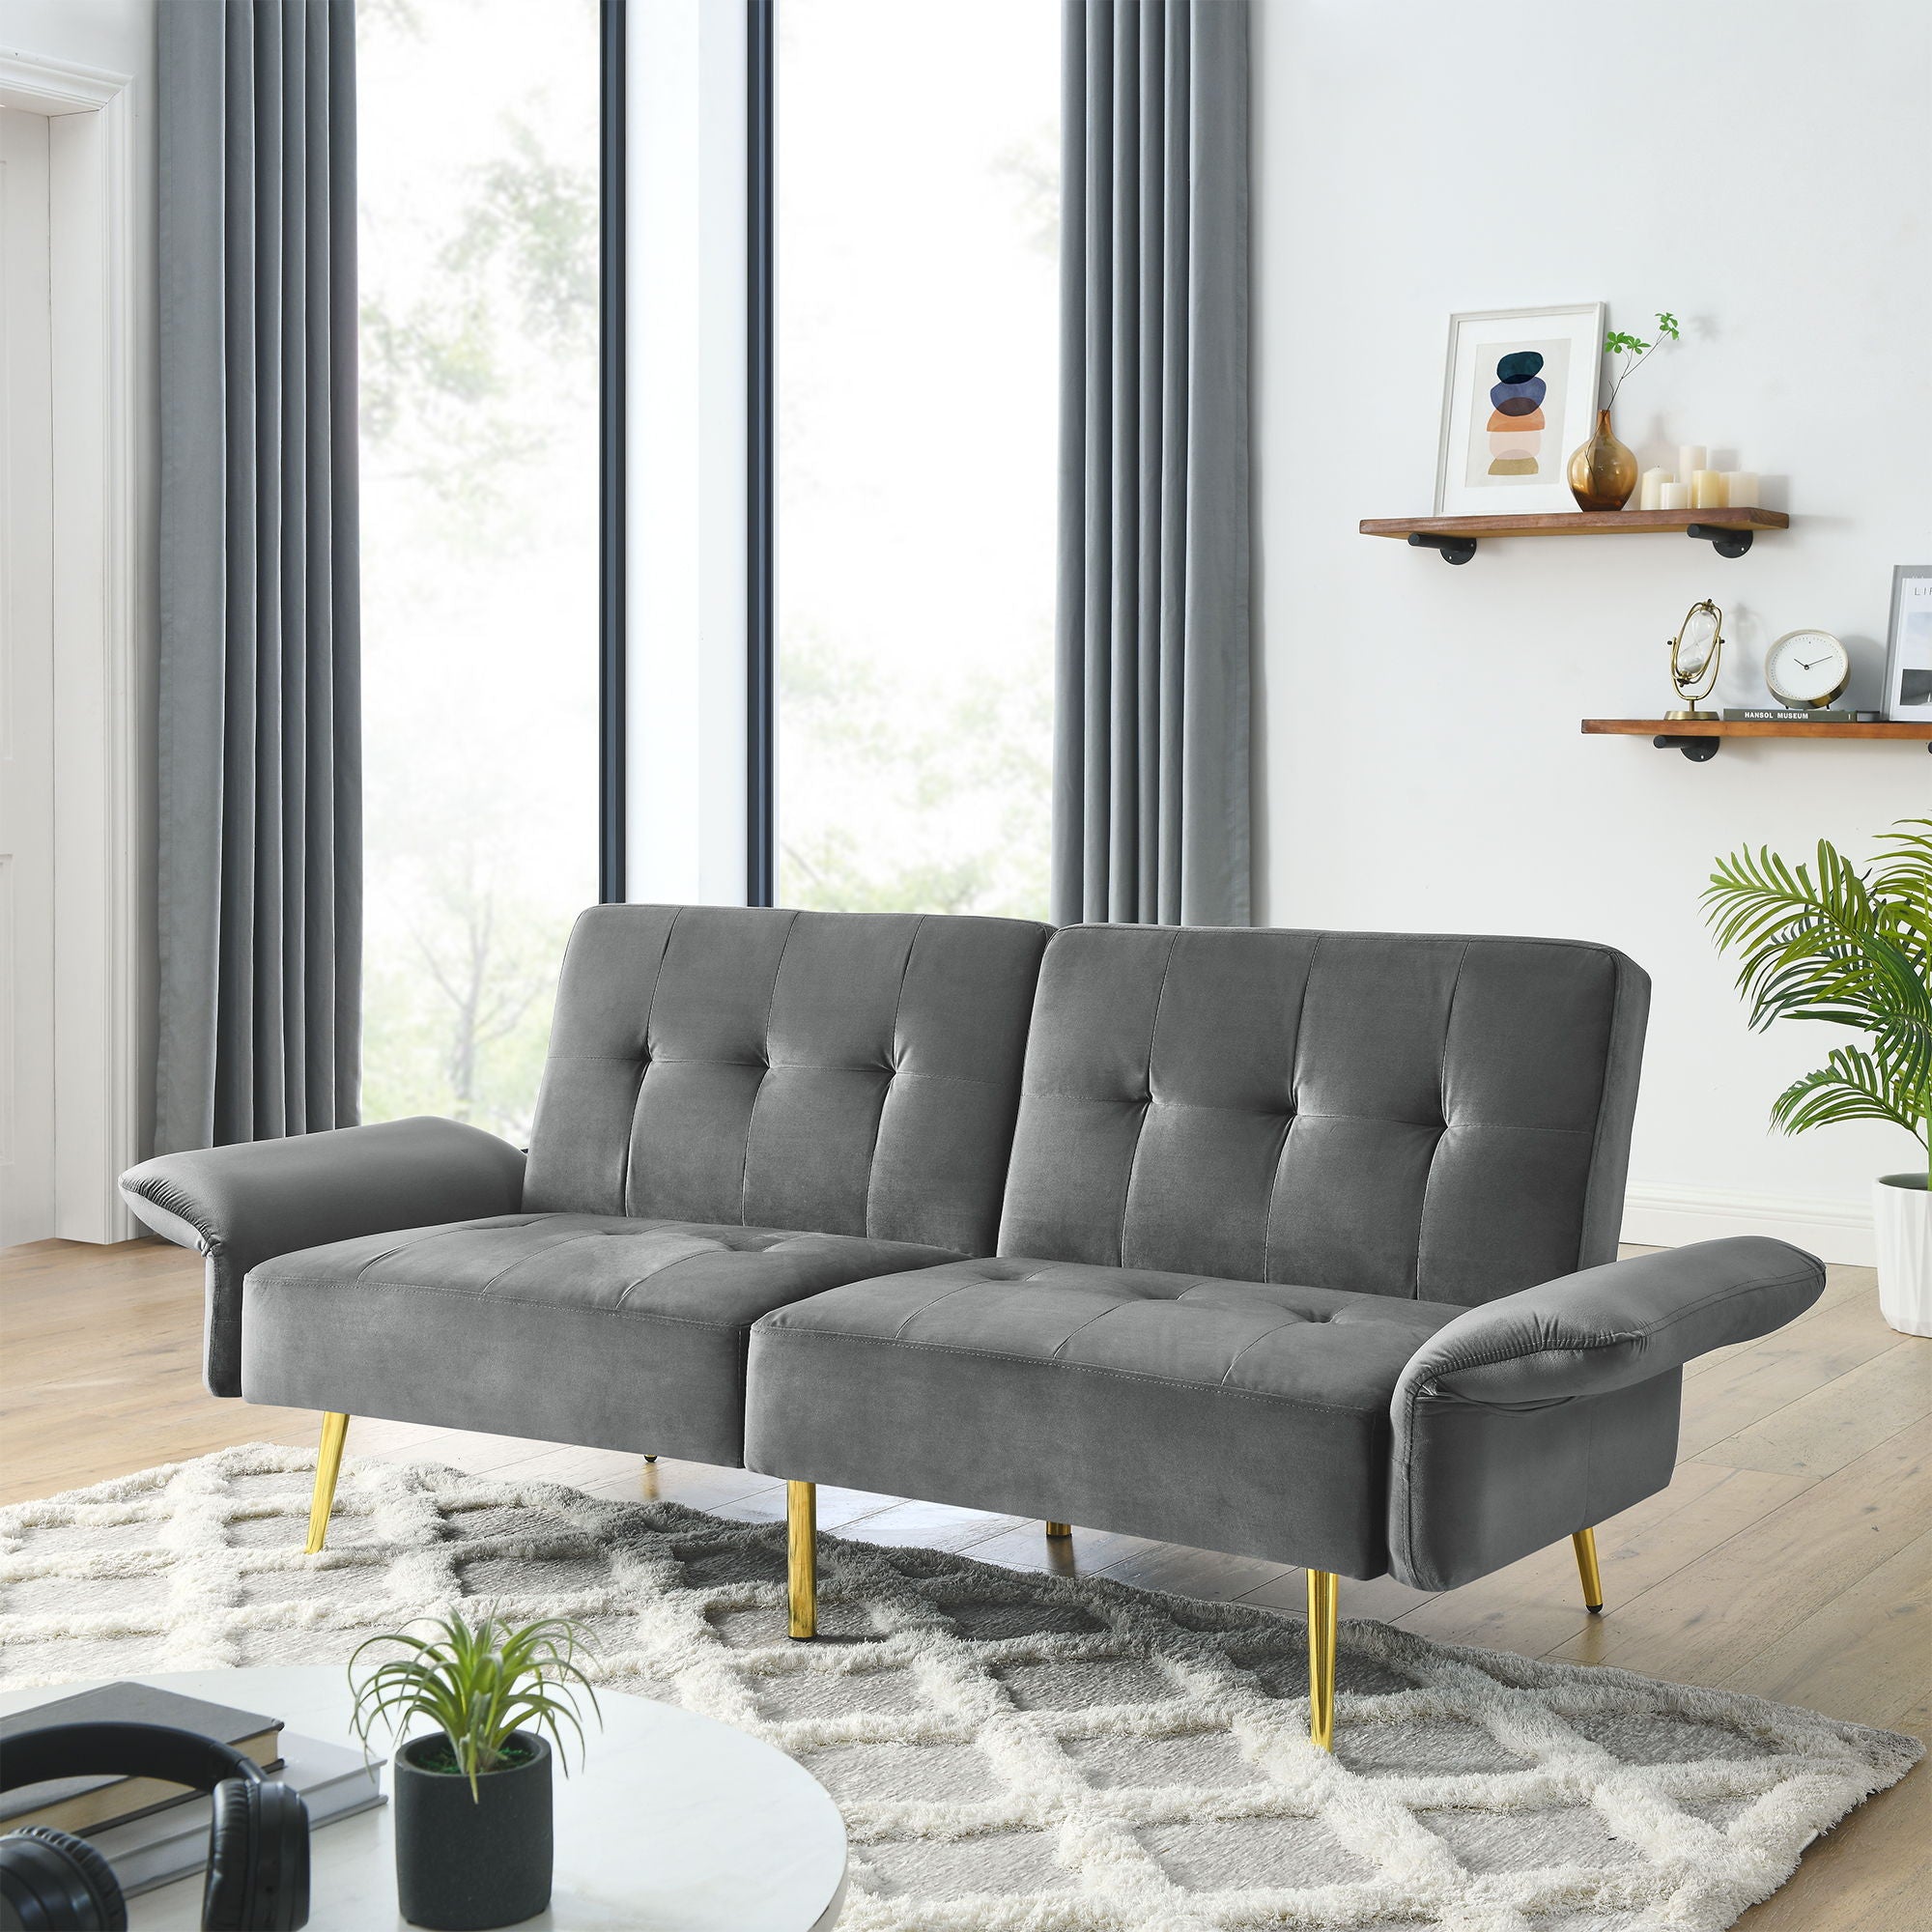 Italian Futon Sofa Bed, Convertible Sleeper Loveseat Couch With Folded Armrests And Storage Bags For Living Room And Small Space, Grey